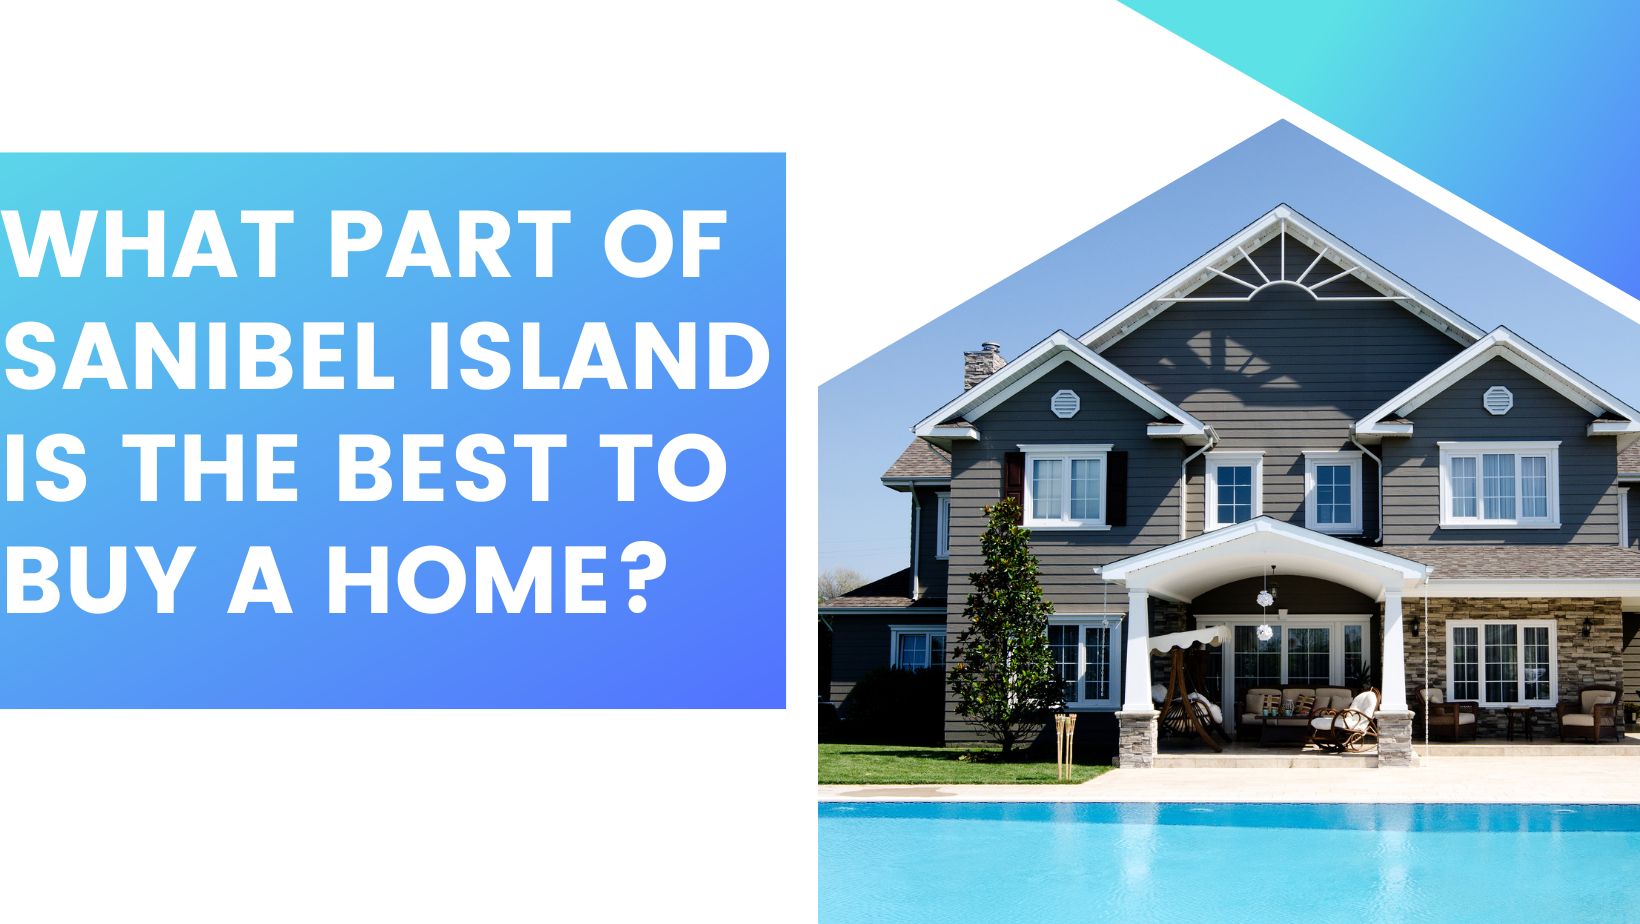 What Part of Sanibel Island is the Best to Buy a Home?